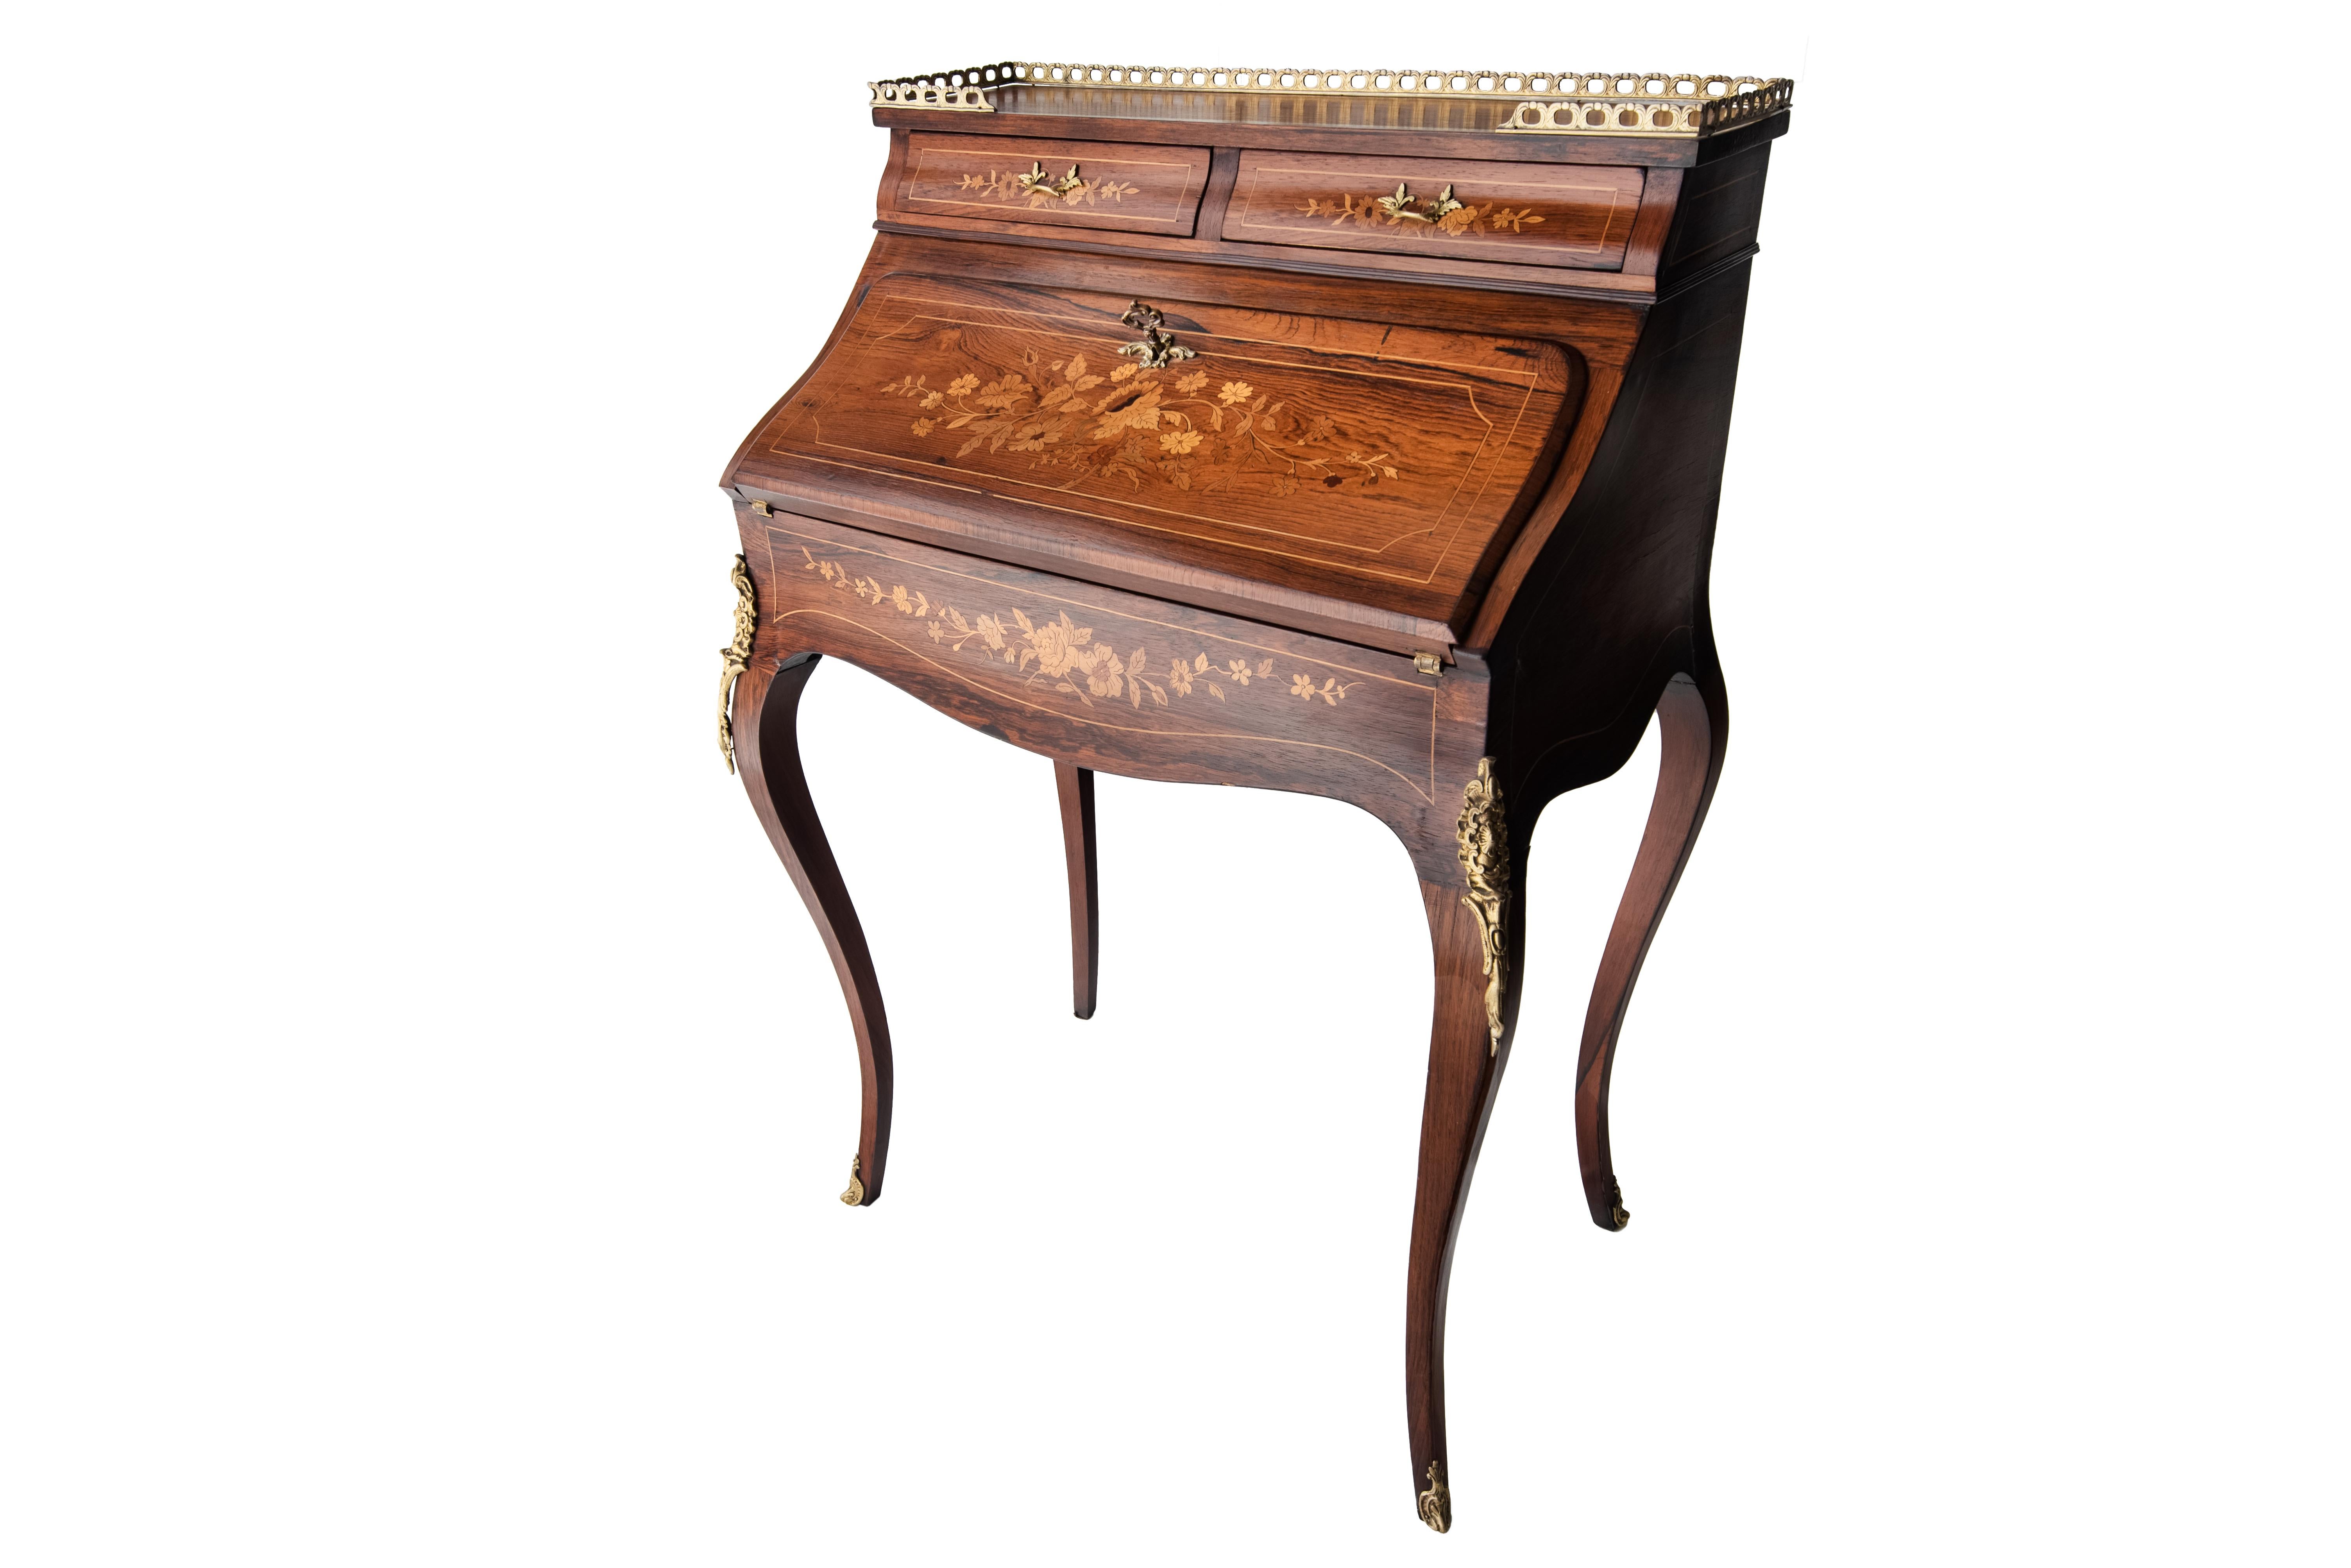 19th century rosewood French Louis XV style marquetry bureau desk with secret compartment, circa 1870.
It is decorated throughout with beautiful floral marquetry and the of the cylinder has a stunning marquetry panel. It has a beautiful top with a